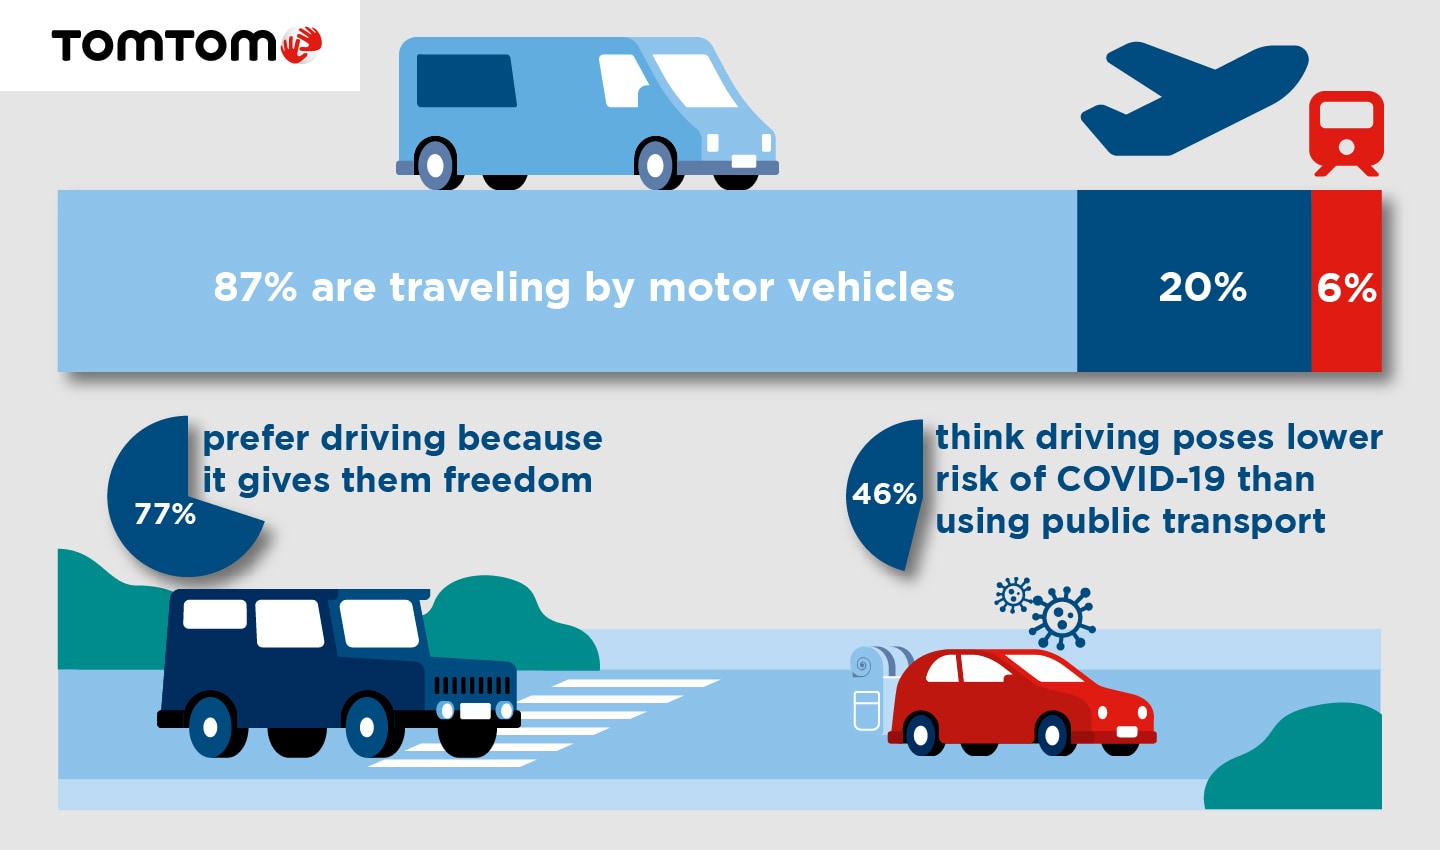 Most Europeans plan to drive on their summer getaway for a variety of reasons